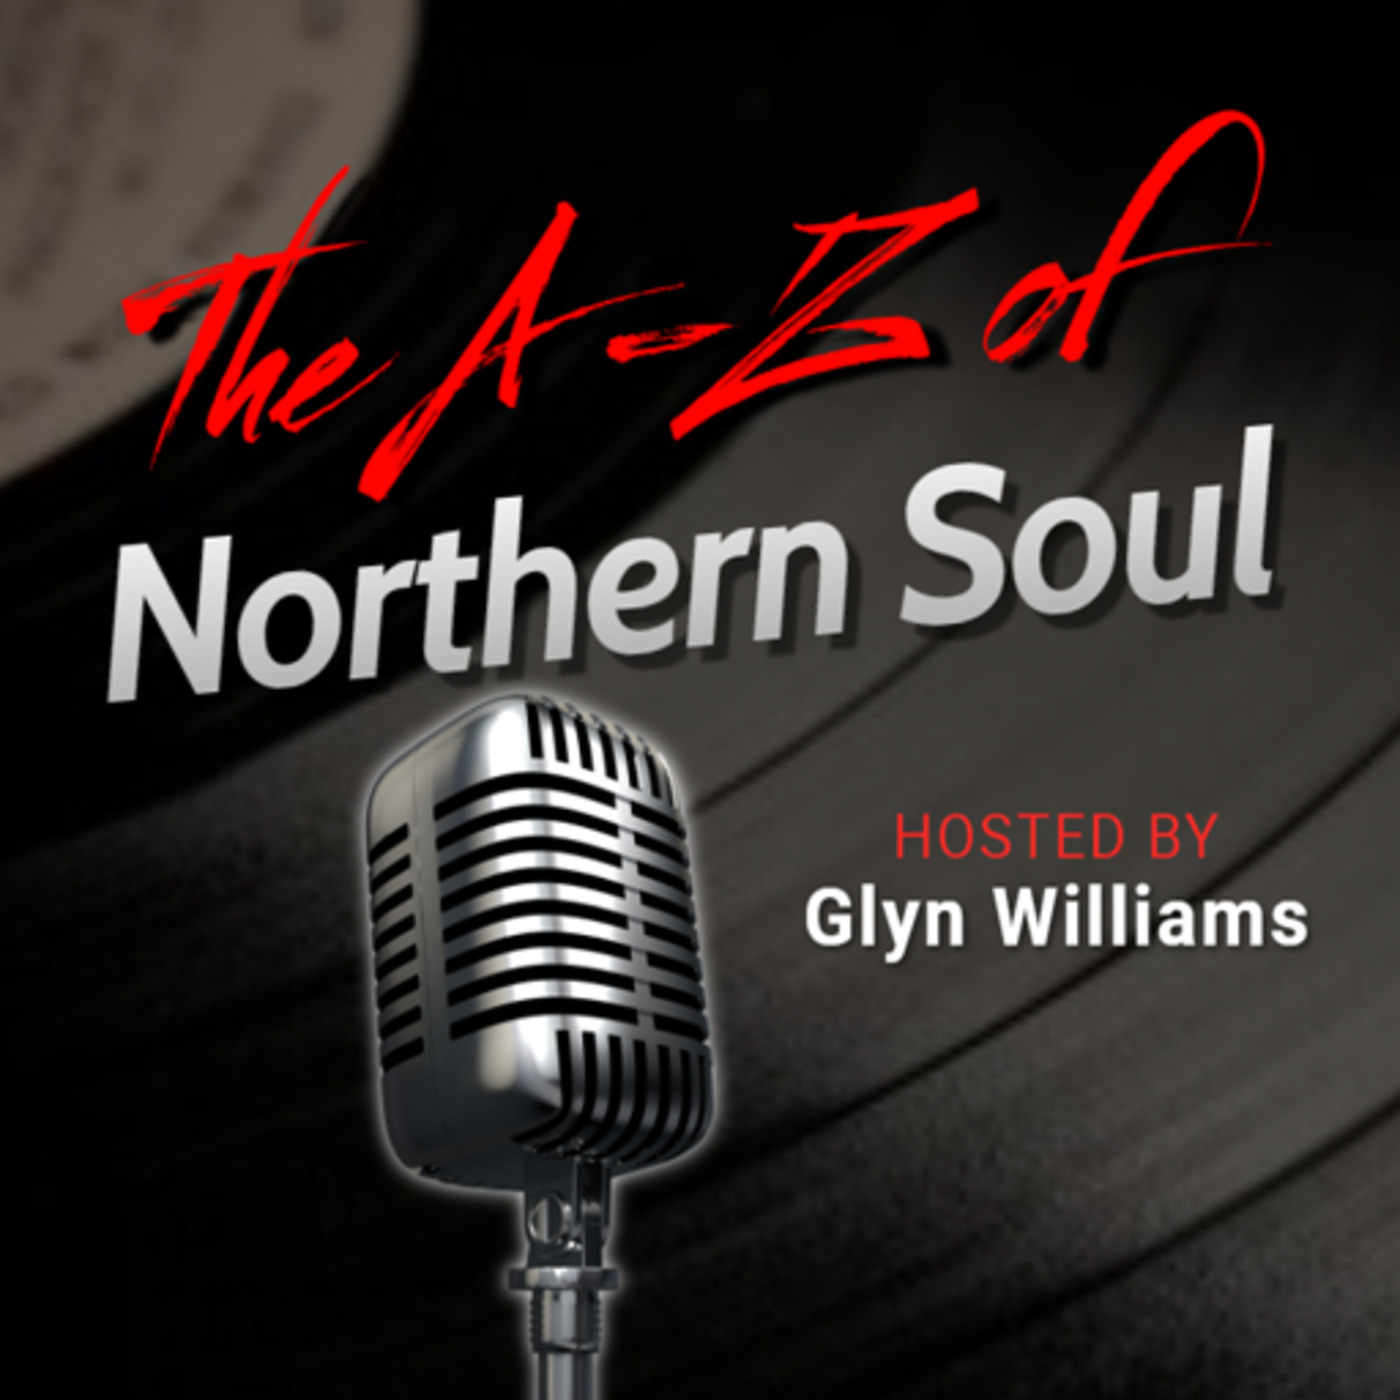 The A-Z of Northern Soul E072